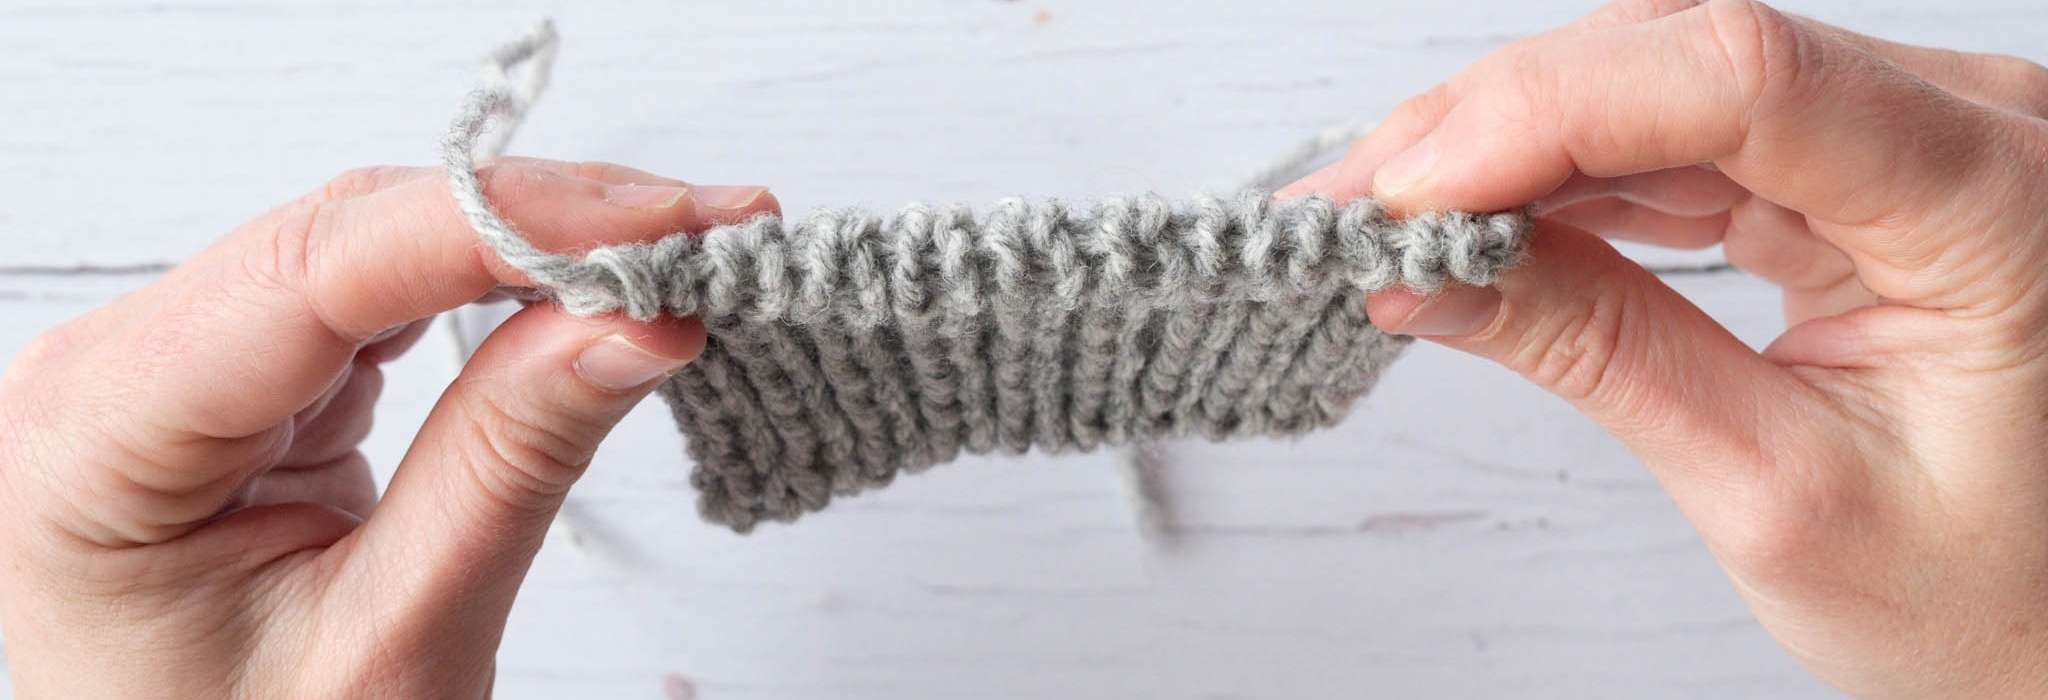 How to knit the yarn over bind off - creates a super stretchy edge